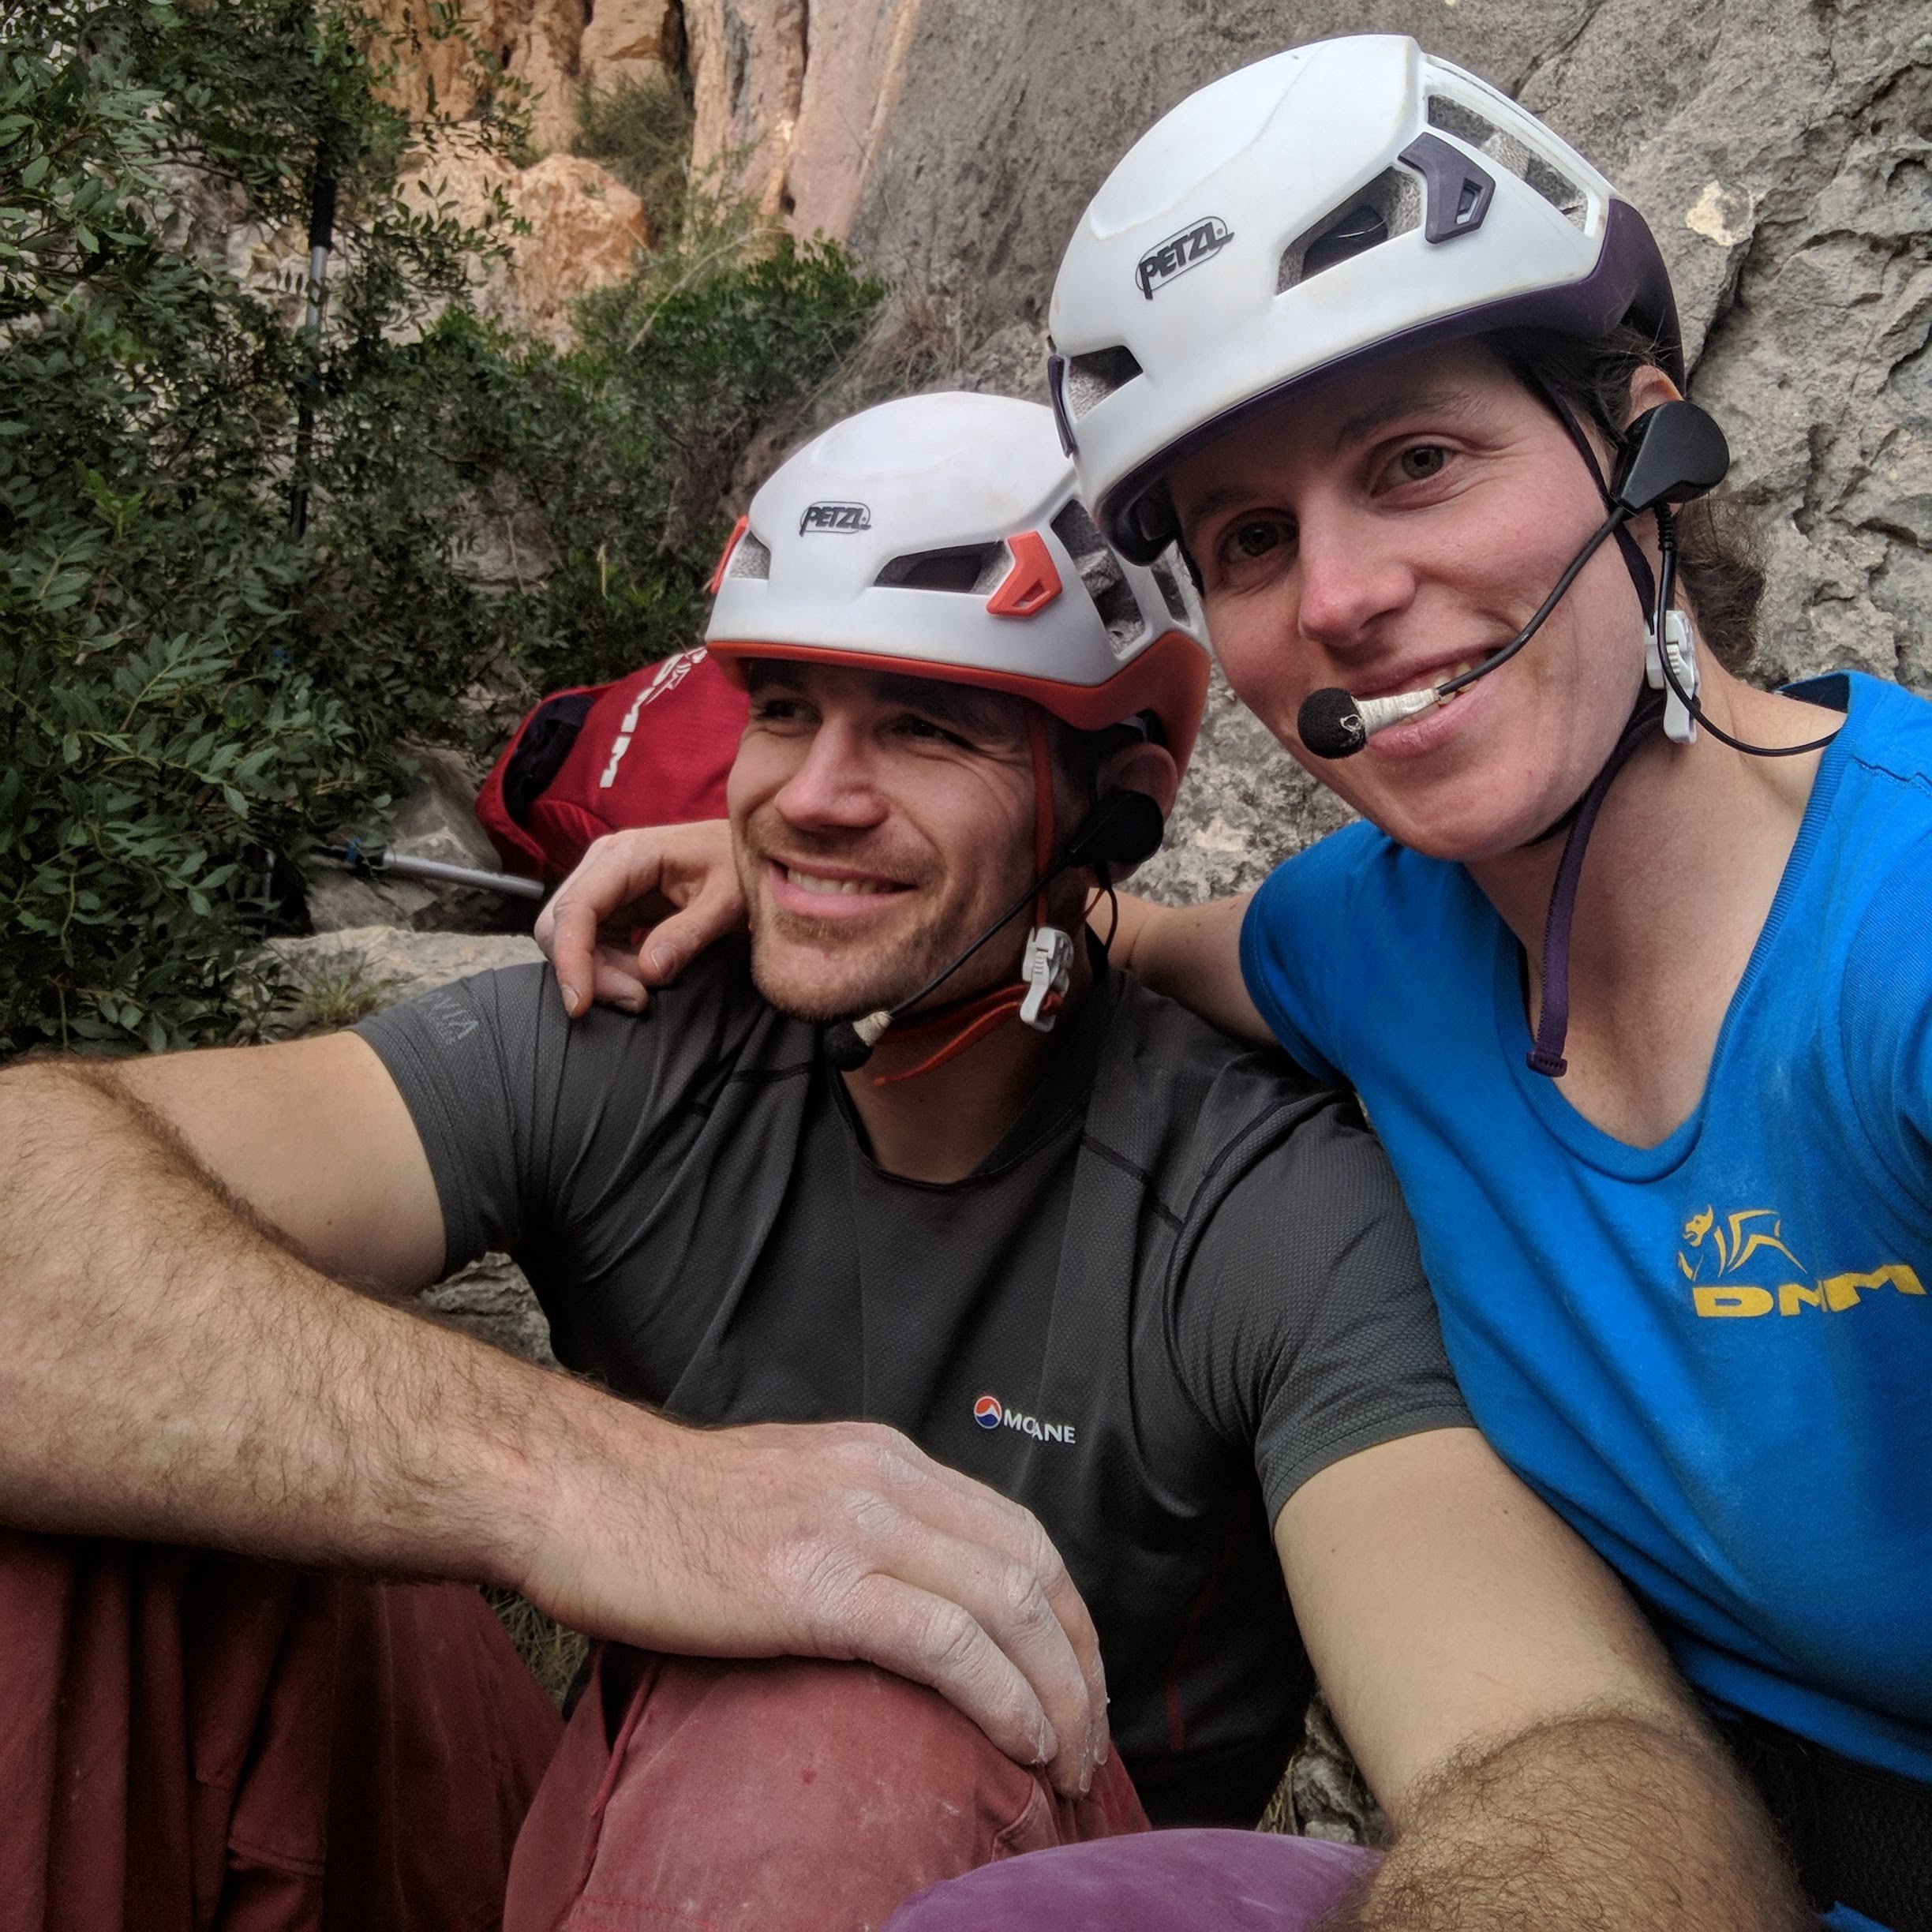 A photo of Jesse and Molly with the helmets and headsets on, sitting at the base of a crag. They both have big smiles on their faces.